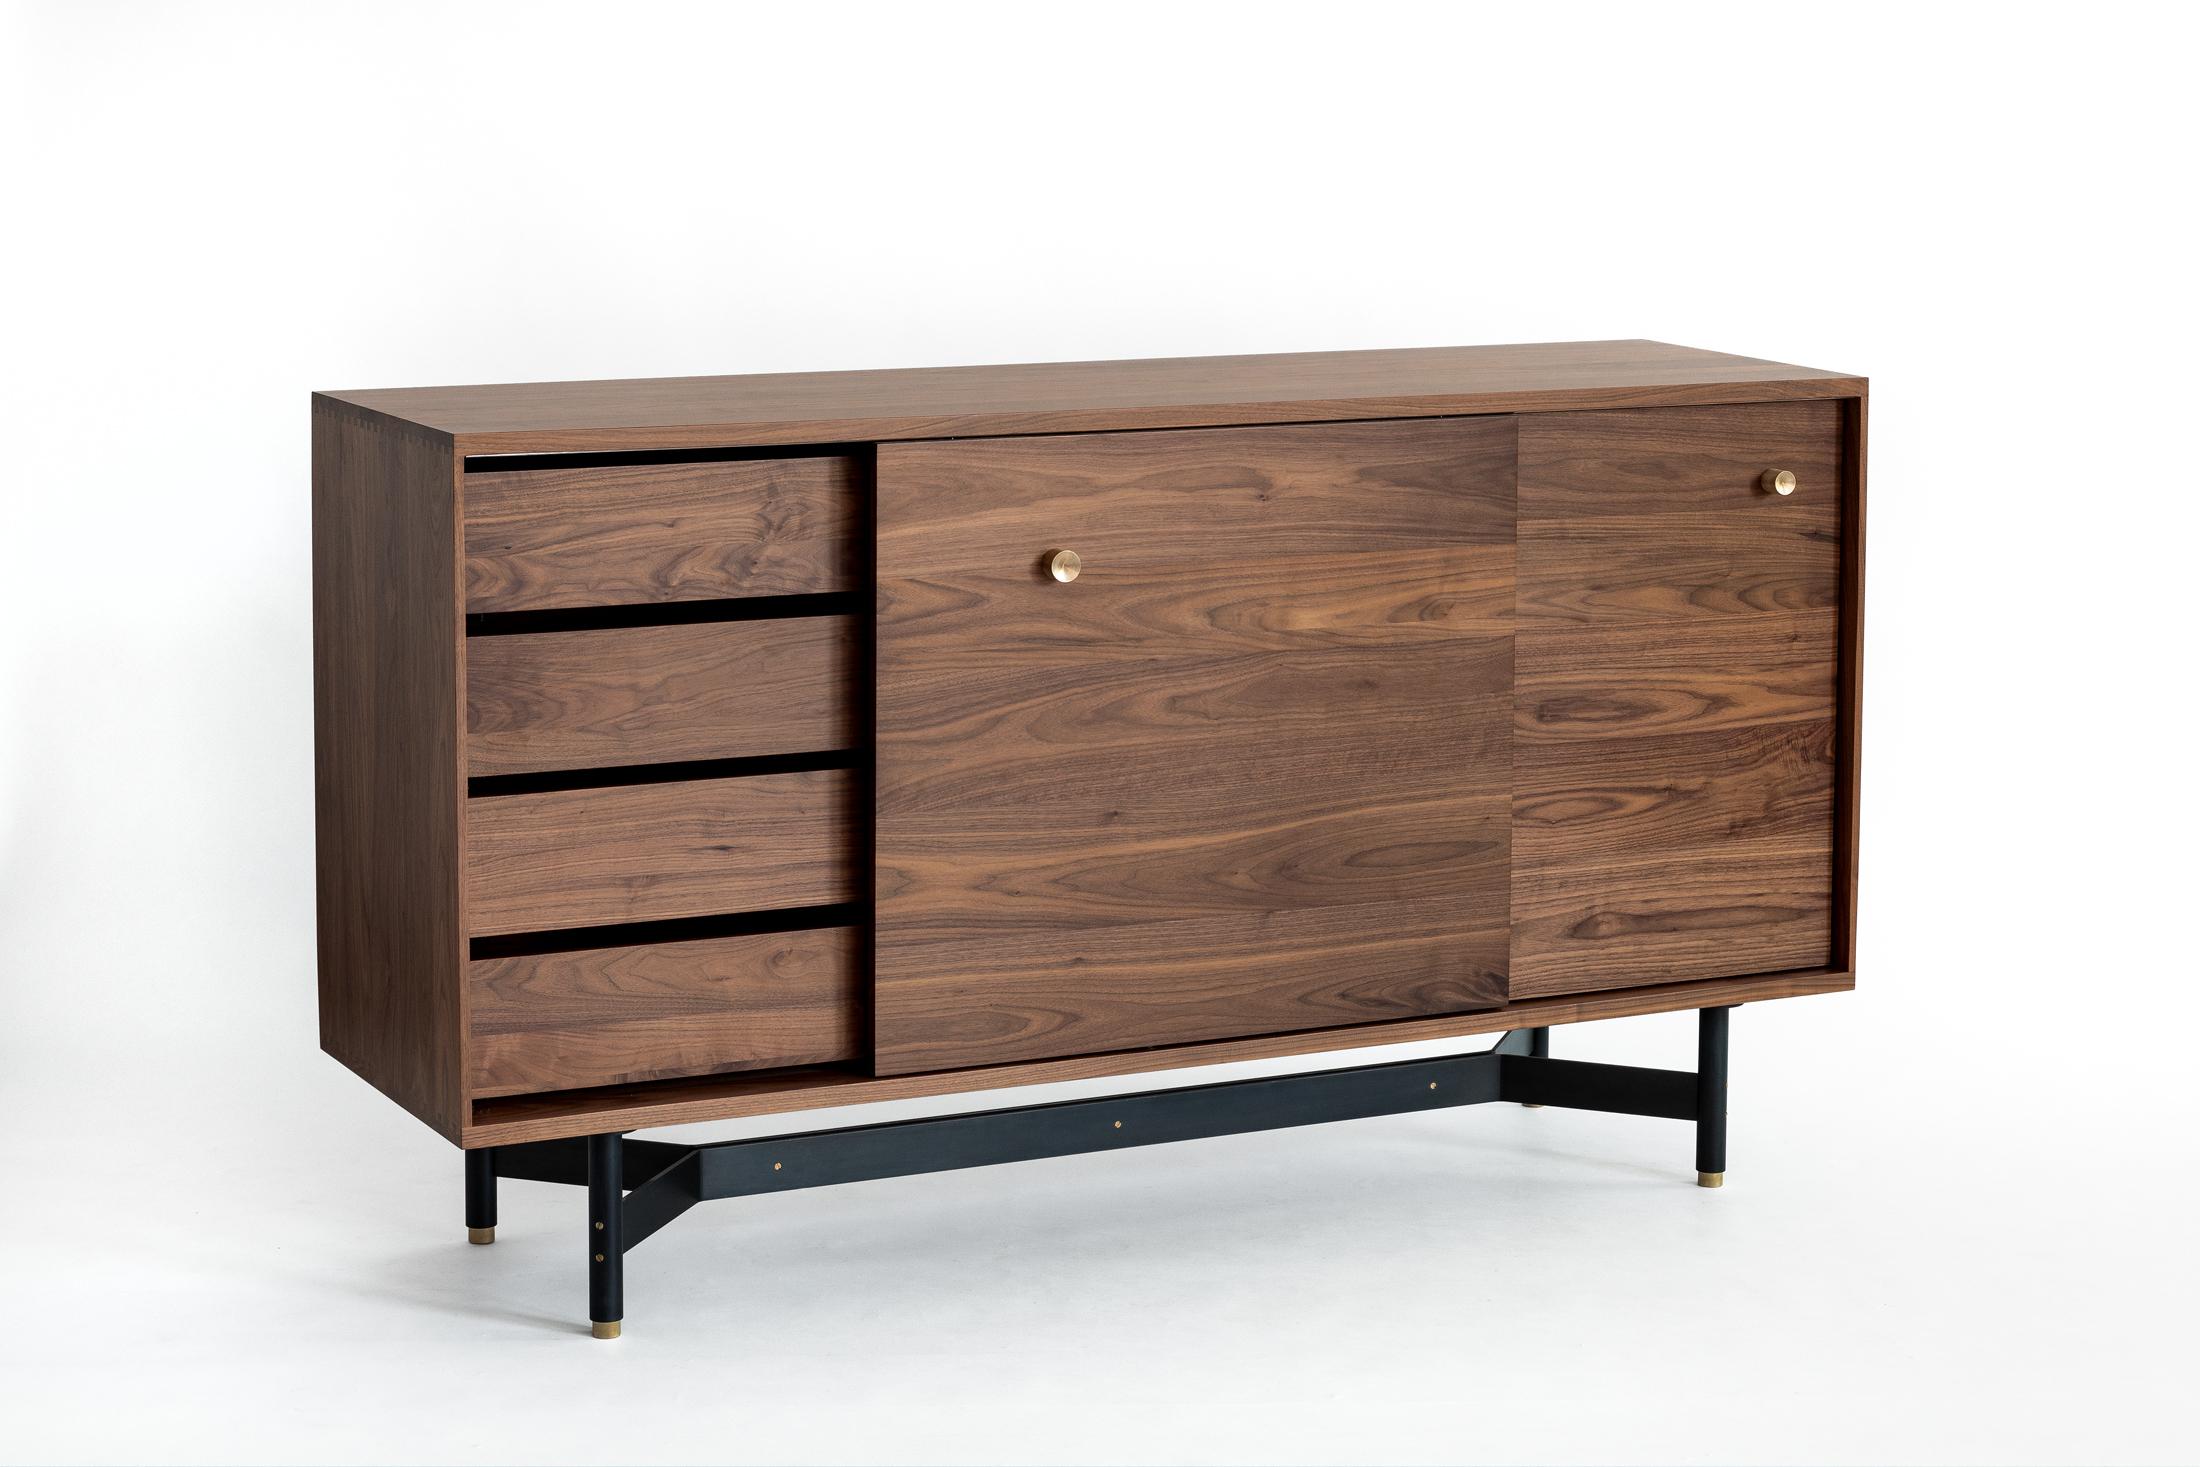 Ac 10 is a handmade, solid walnut dresser console with interior drawers and shelving. It features a clean and minimal exterior, making for an elegant yet functional storage solution for a variety of applications in the home or office.

Shown in